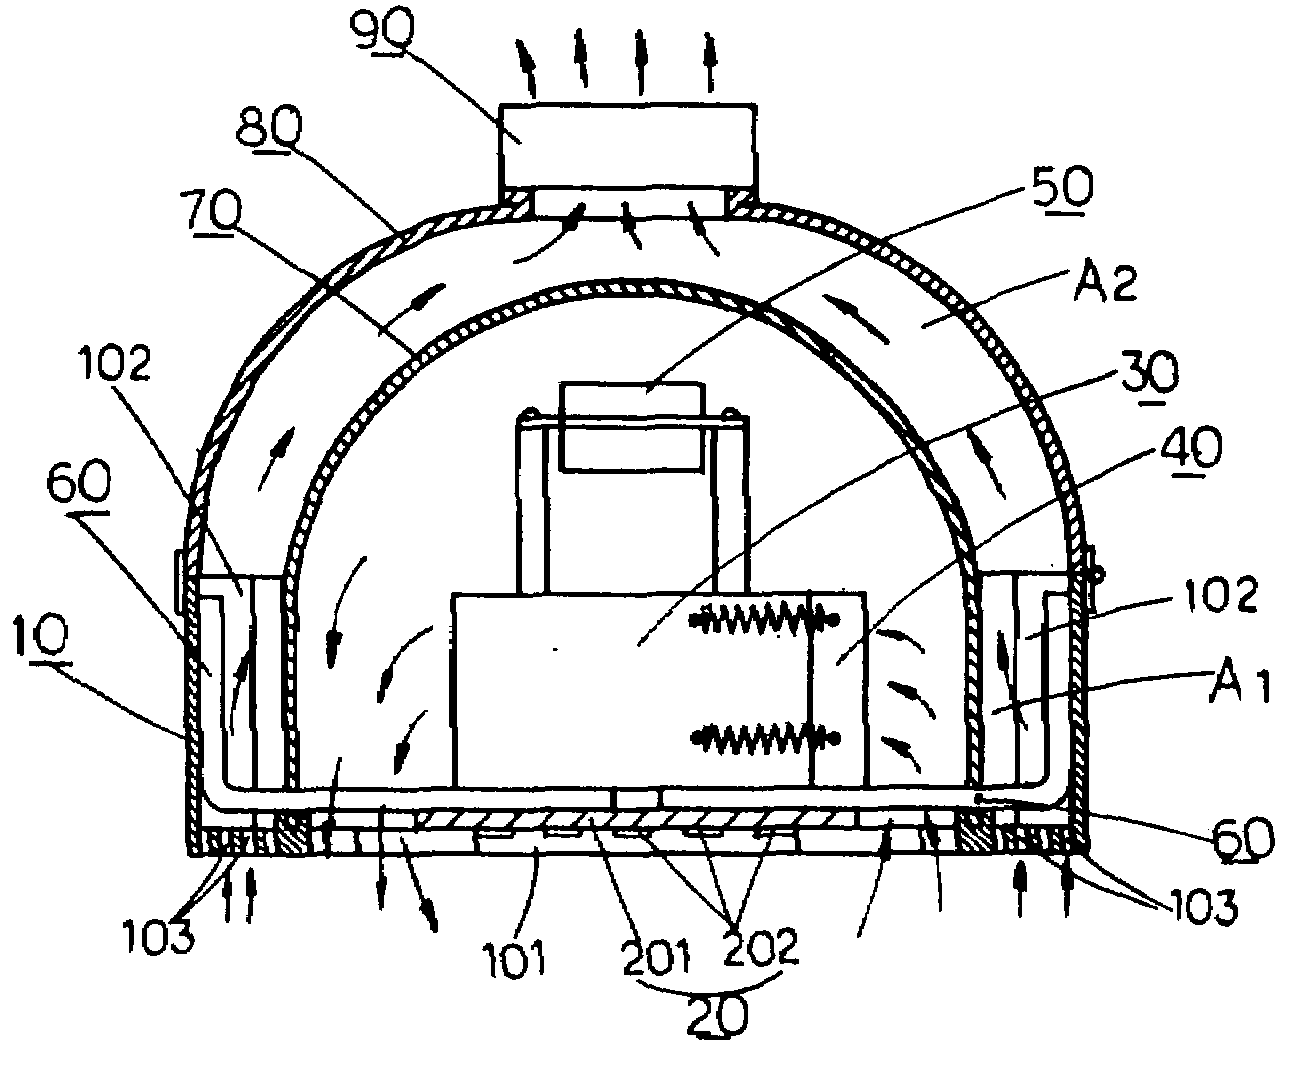 Heat radiating device for lamp